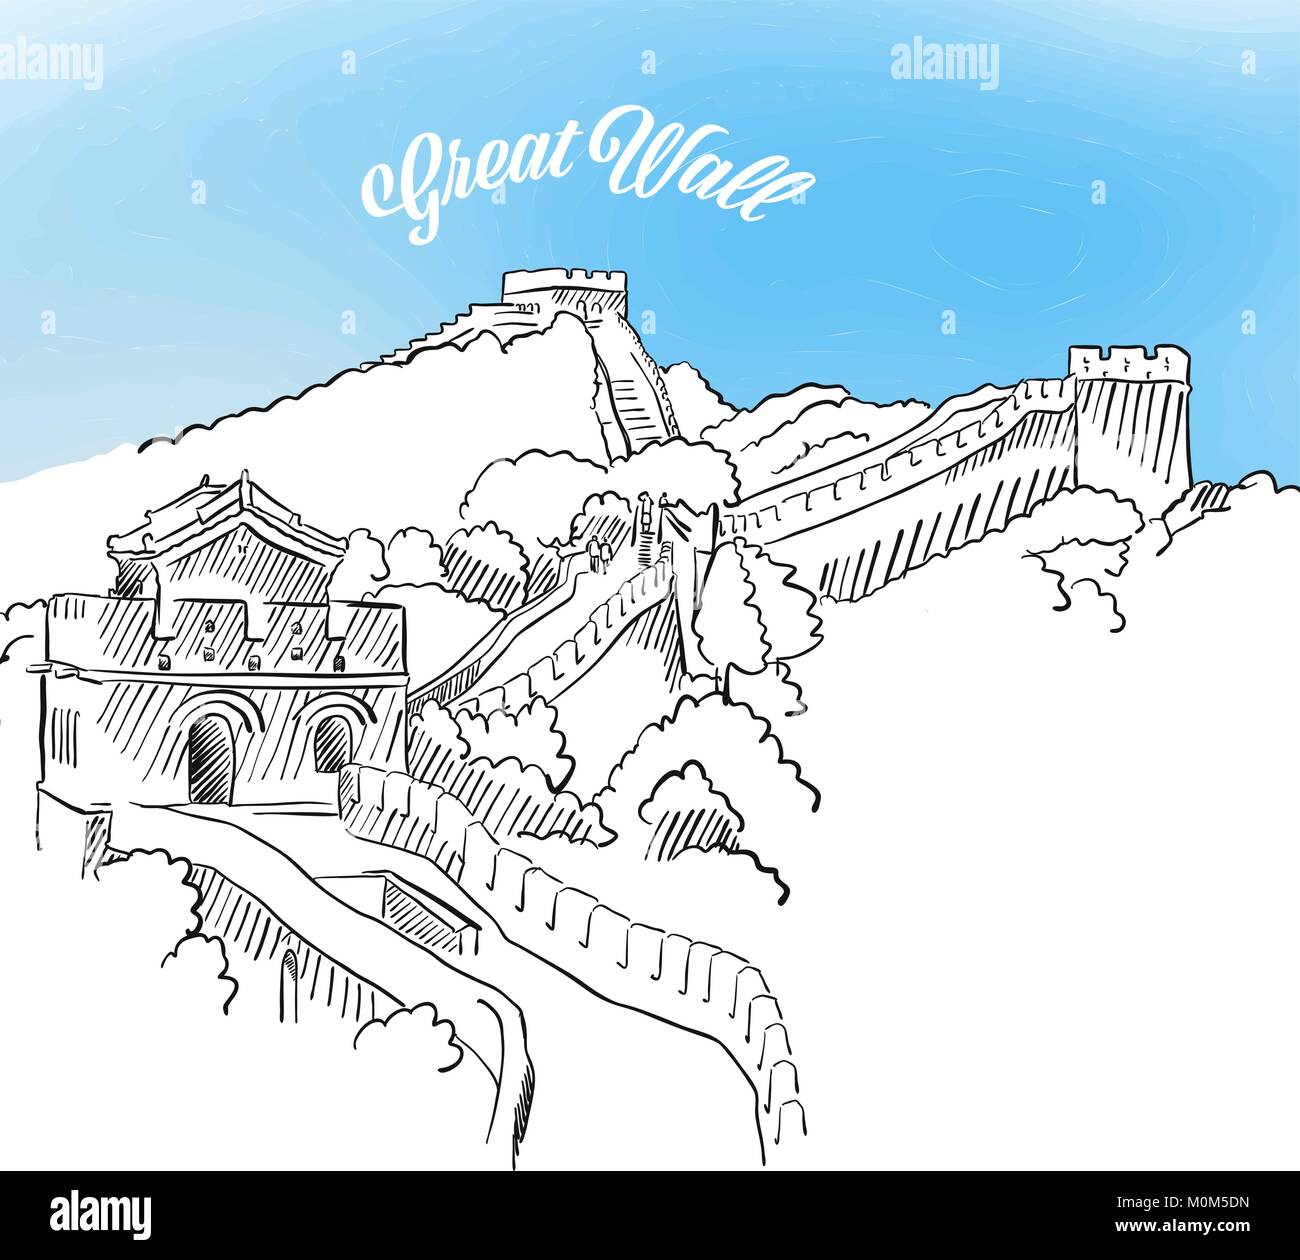 Sketch Of Great Wall In China Hand Drawn Vector Illustration With Modern Headline Use For Greeting Card And Travel Marketing Stock Vector Image Art Alamy